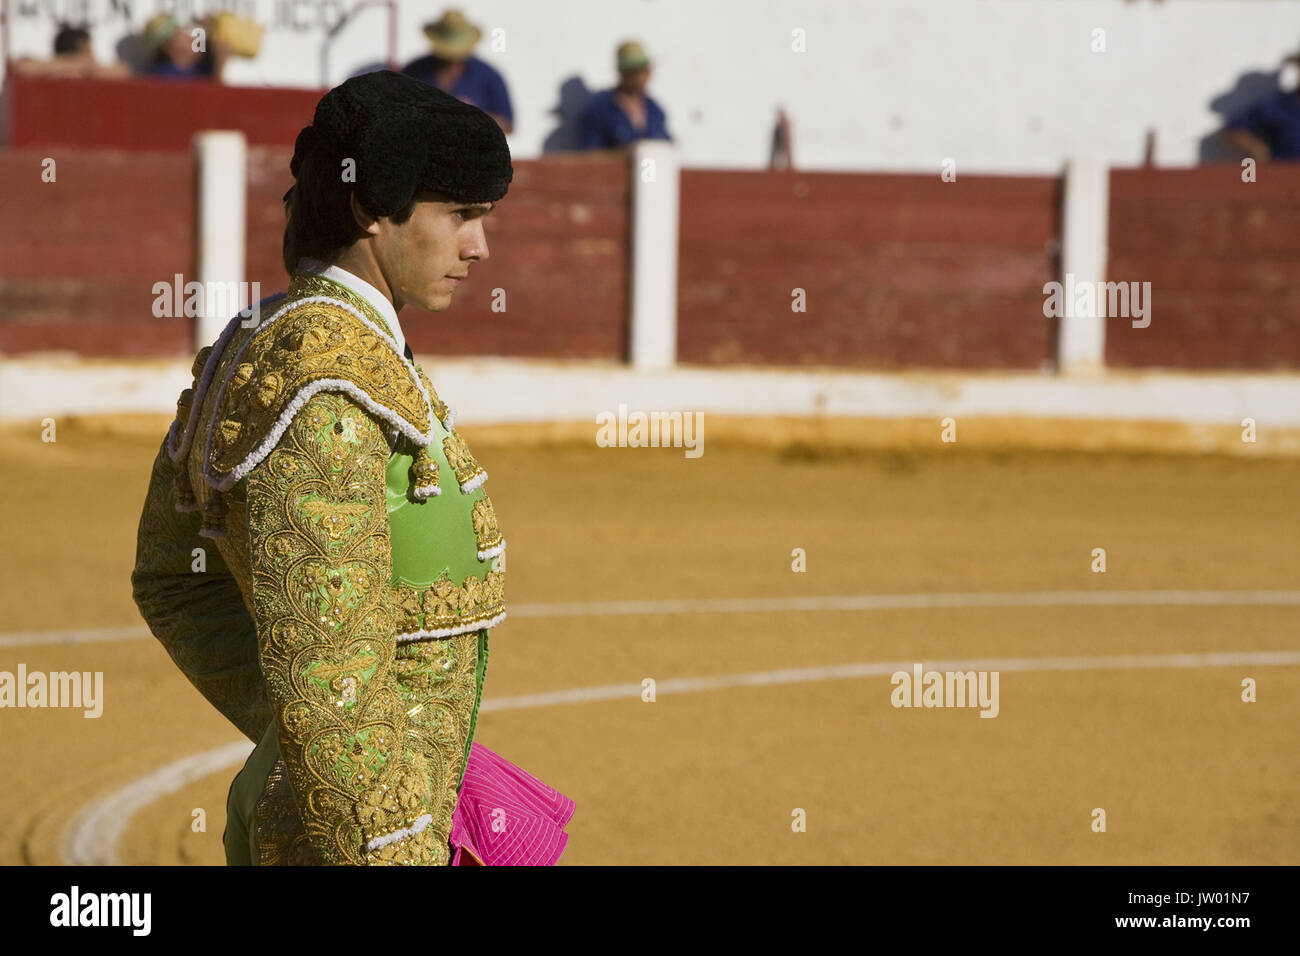 The French Bullfighter Sebastian Castella bullfighting with the crutch in the Bullring of Villacarrillo, Spain Stock Photo